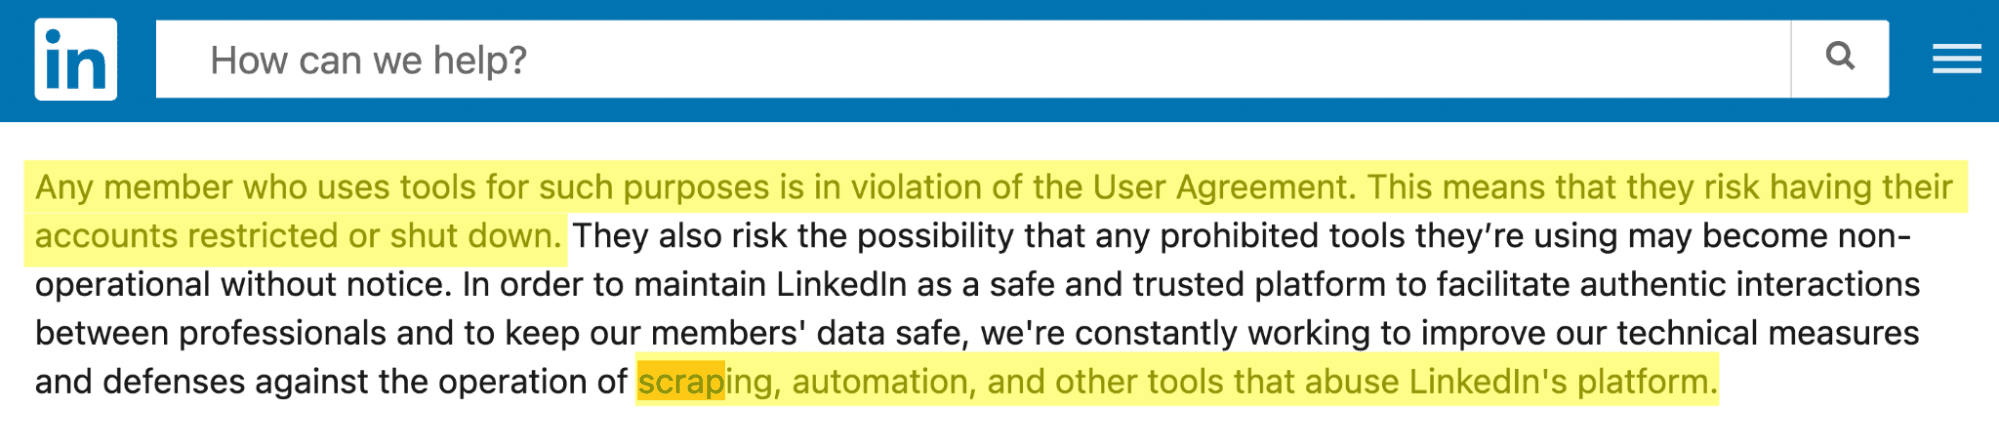 linkedin terms of service disencourage scraping and account can be banned - image7.png